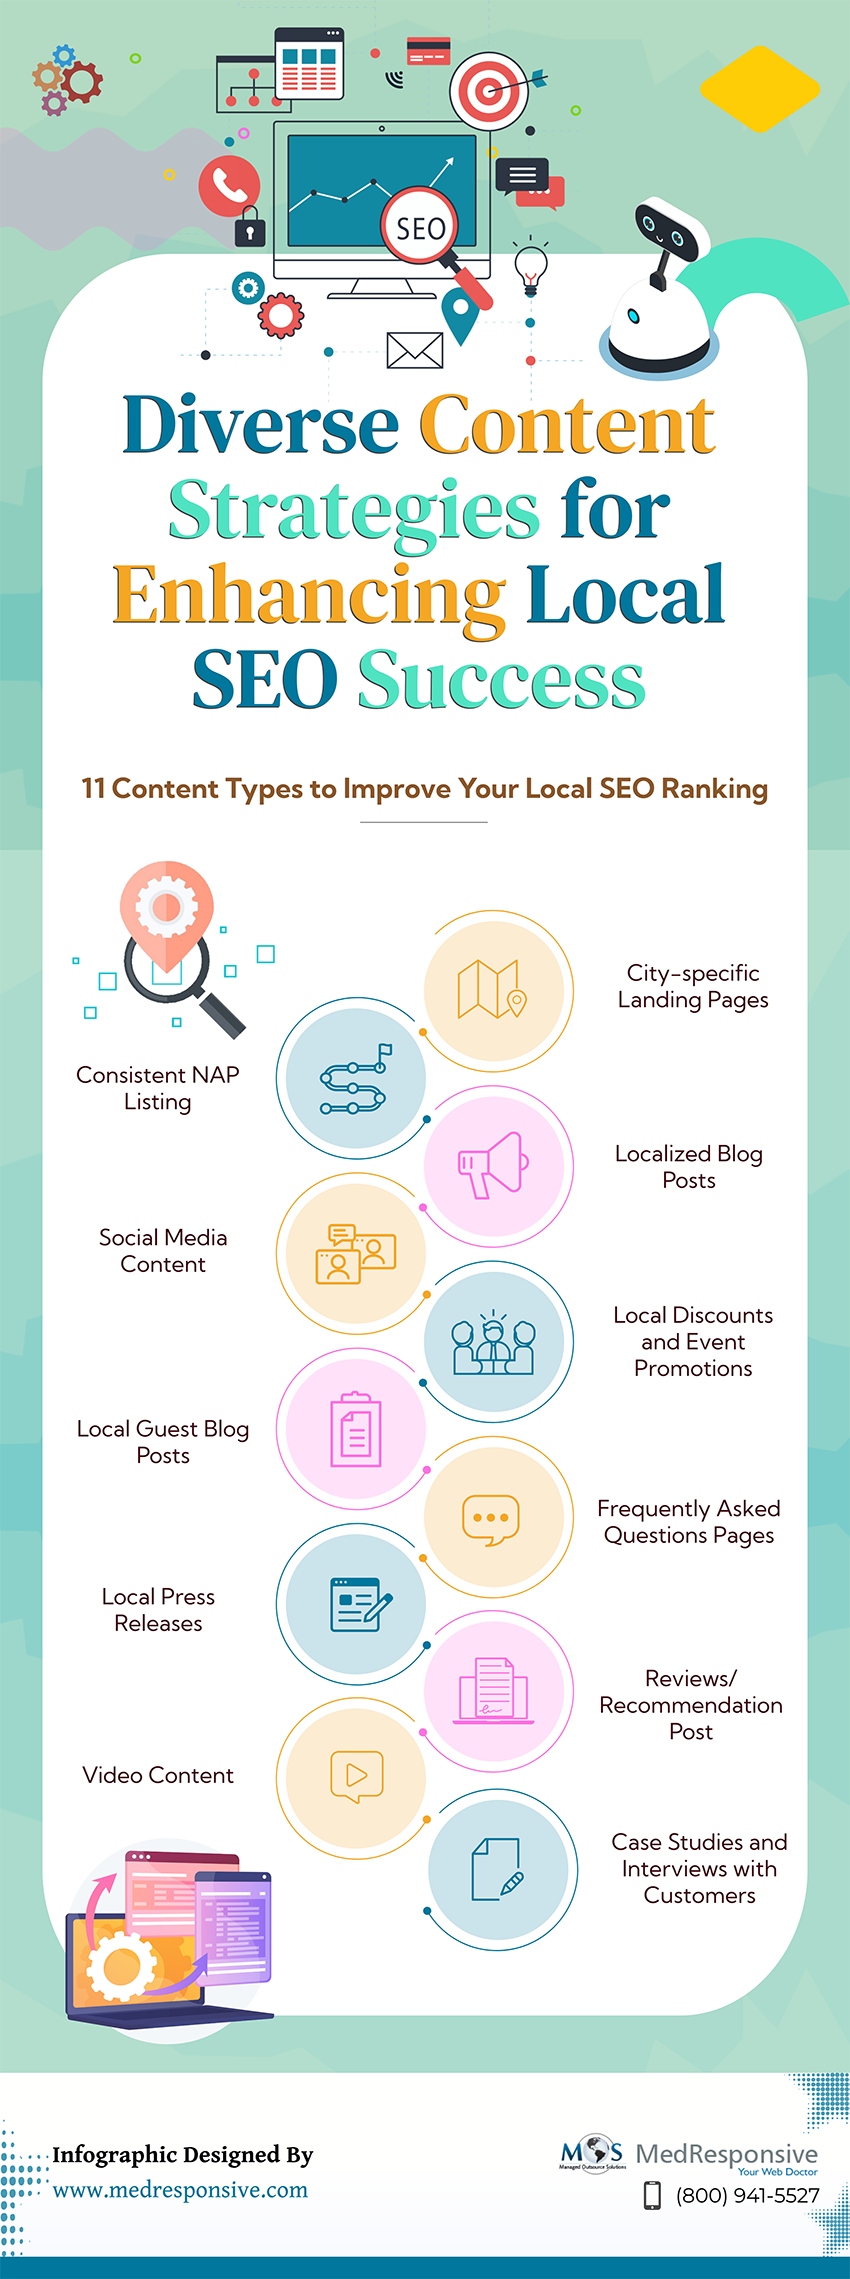 Diverse Content Strategies for Enhancing Local SEO Success